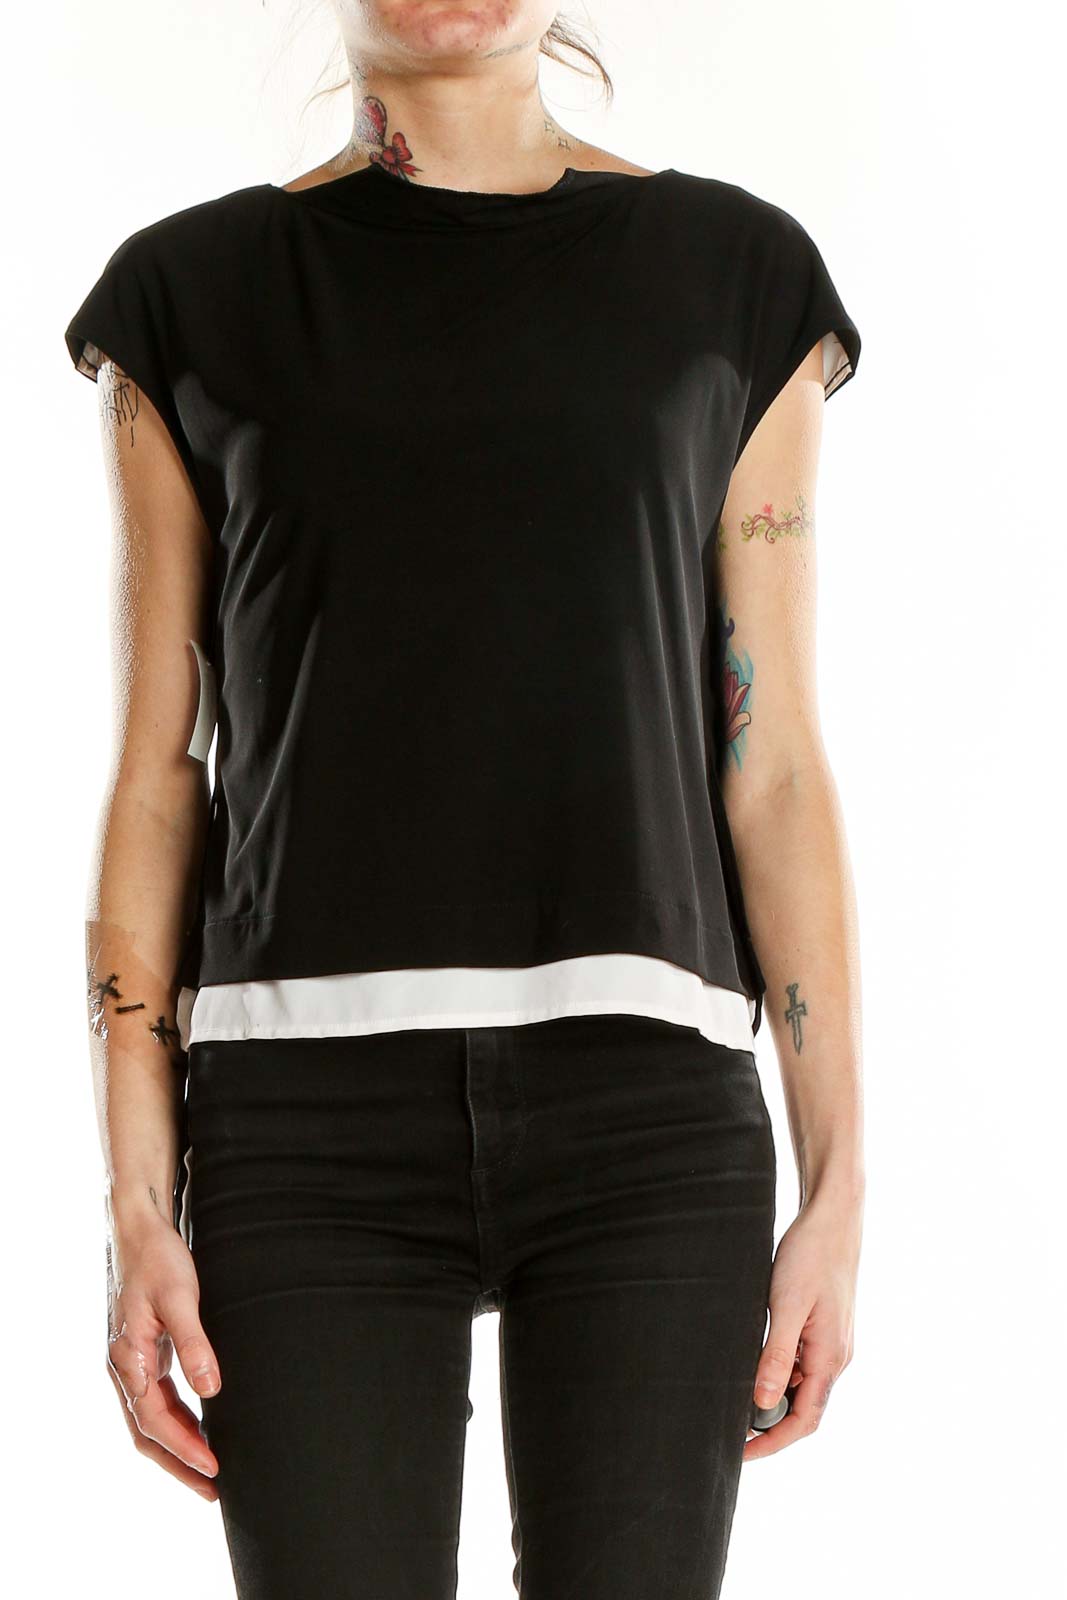 Black White Shorts Sleeve Top Front